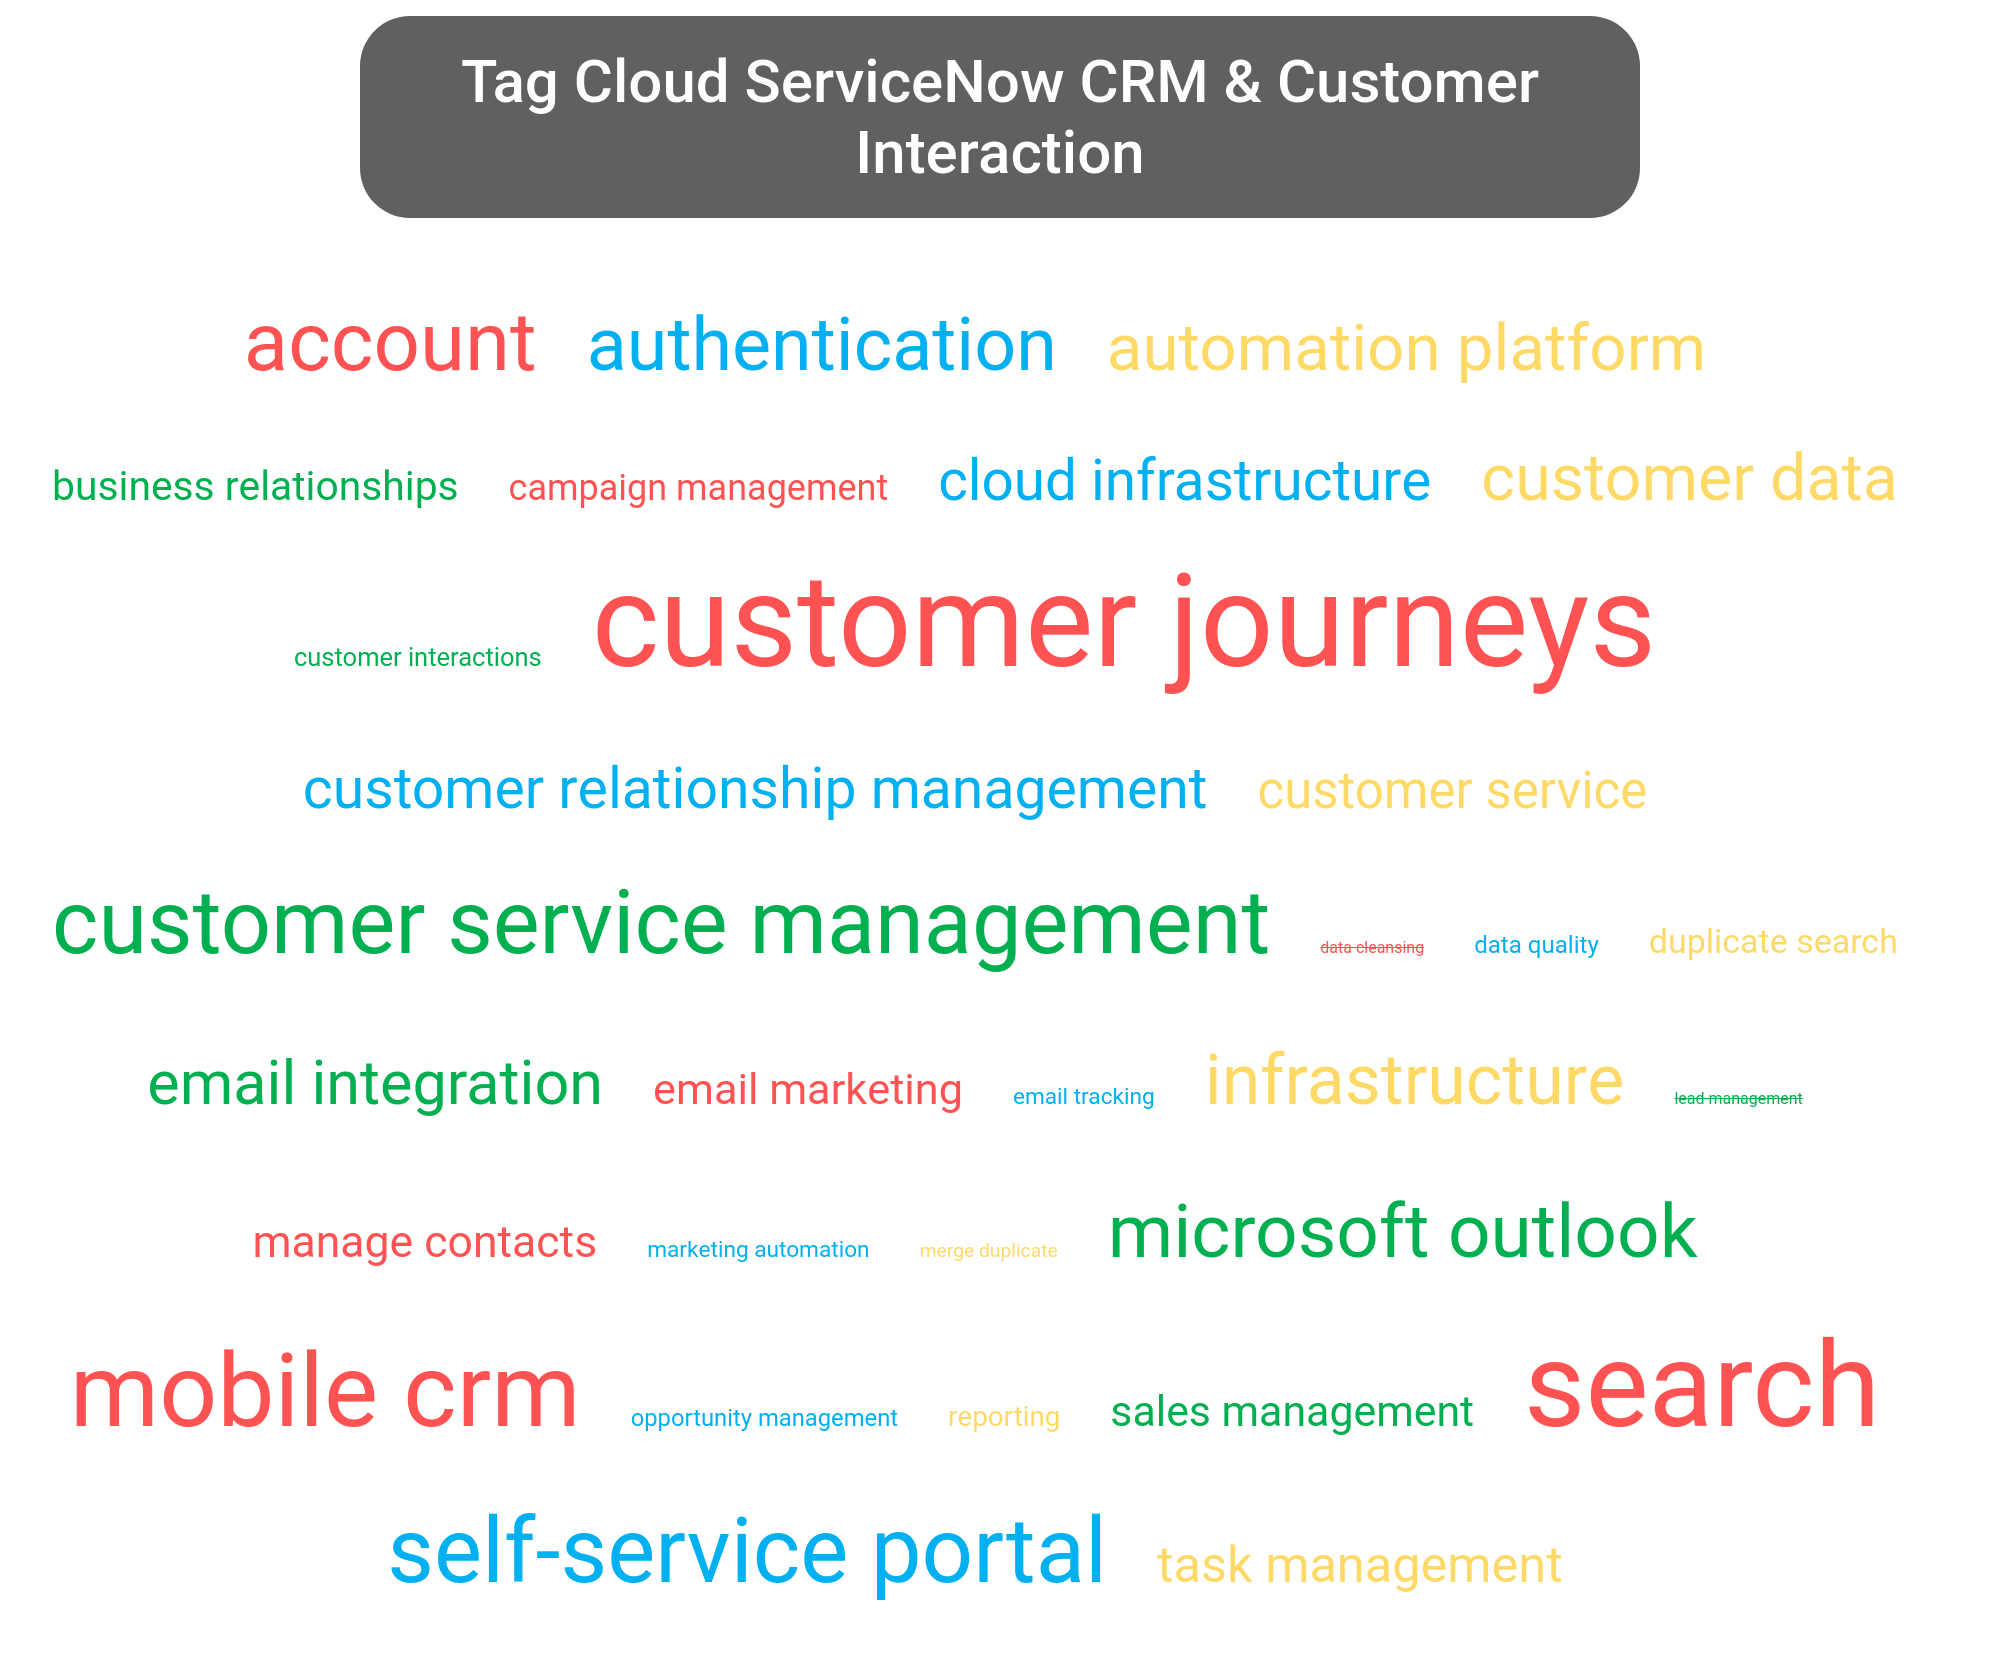 Tag cloud of the ServiceNow platform tools.